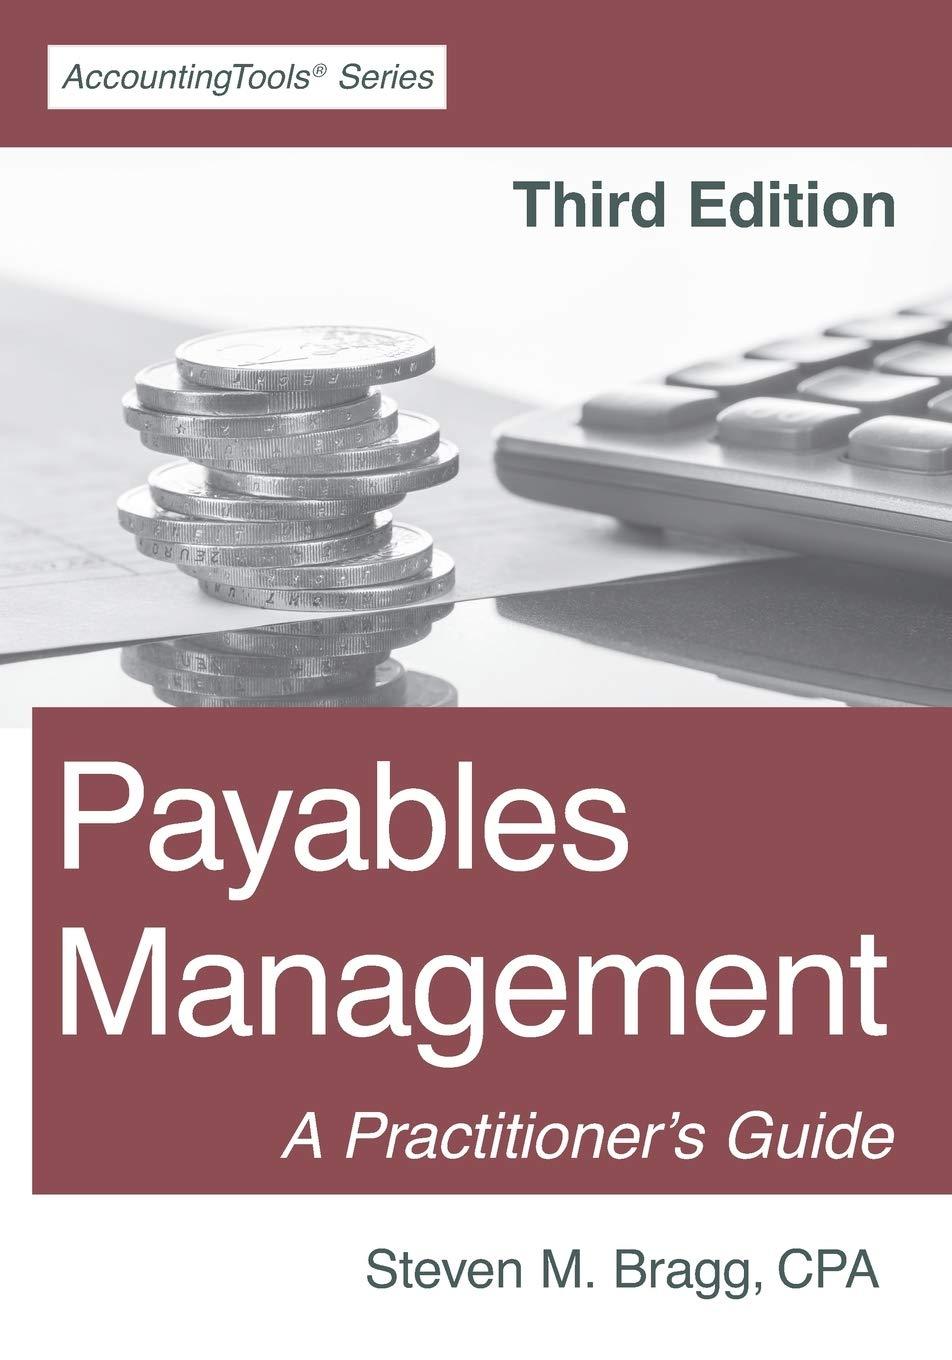 payables management a practitioners guide 3rd edition steven m. bragg 1642210501, 978-1642210507